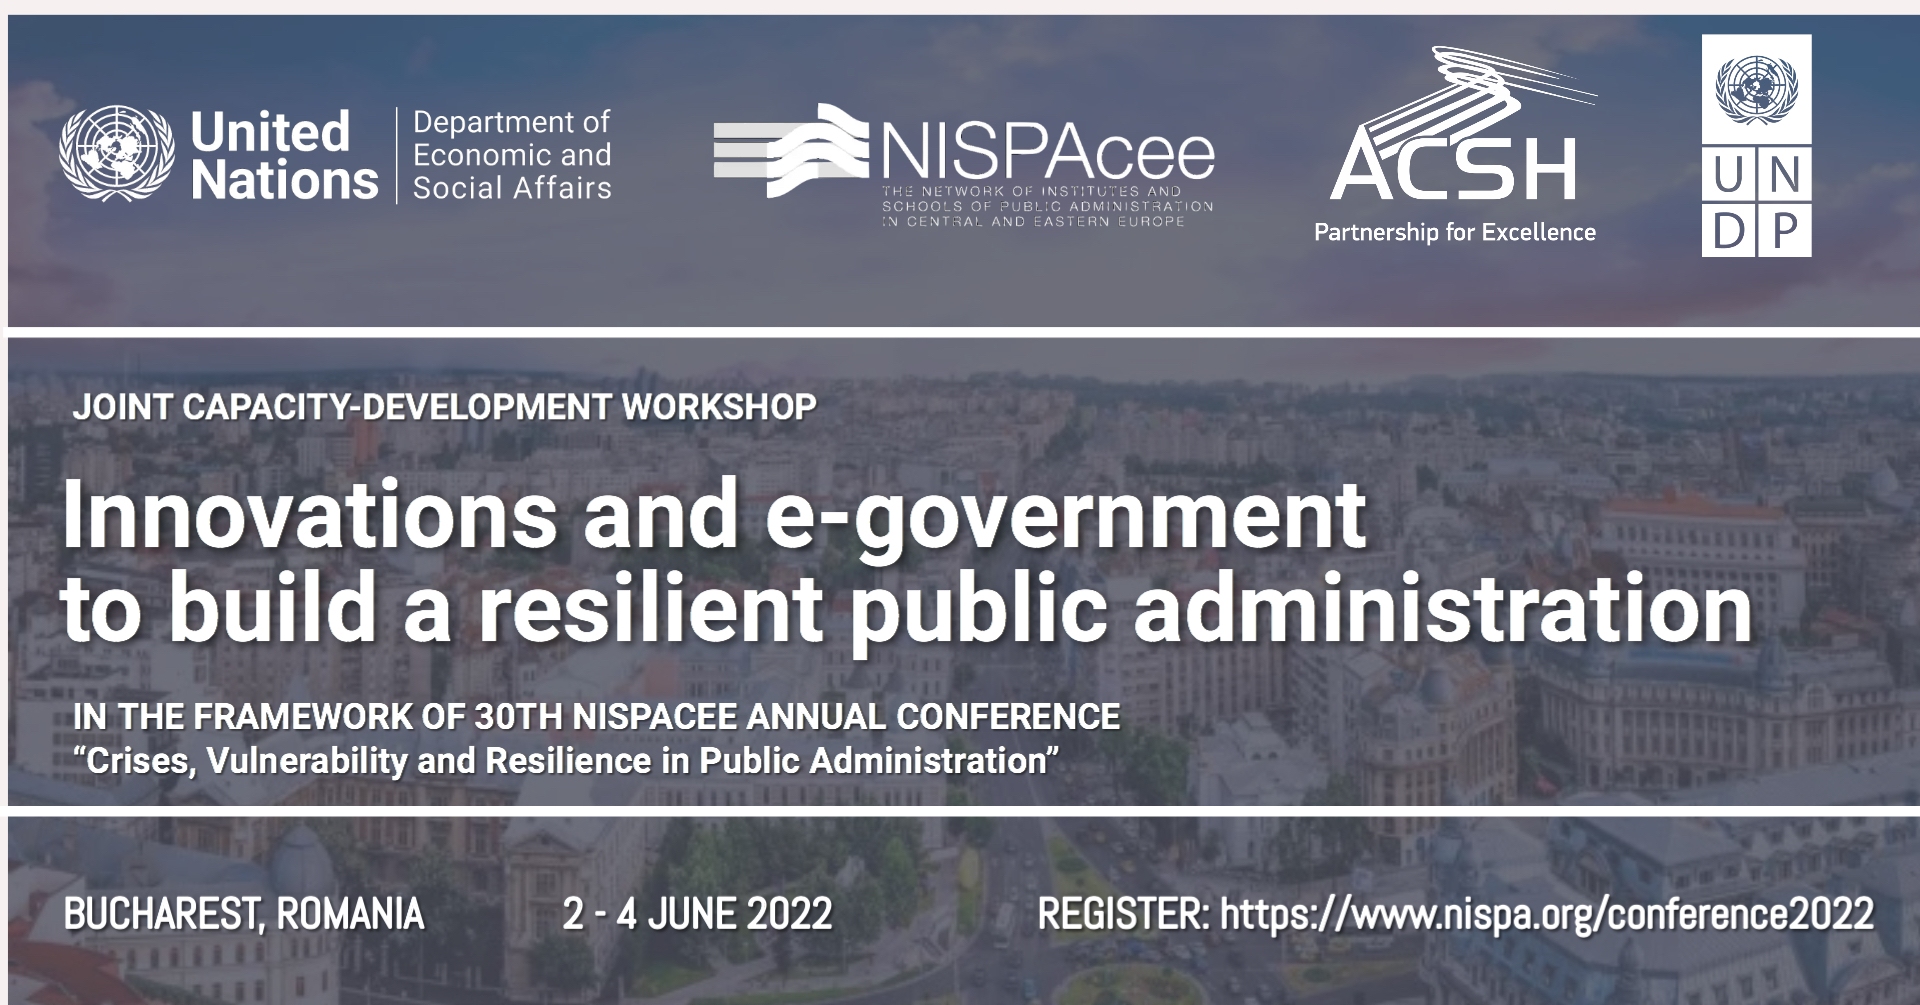 DON’T MISS the workshop on “Innovations and e-government to build a resilient public administration”